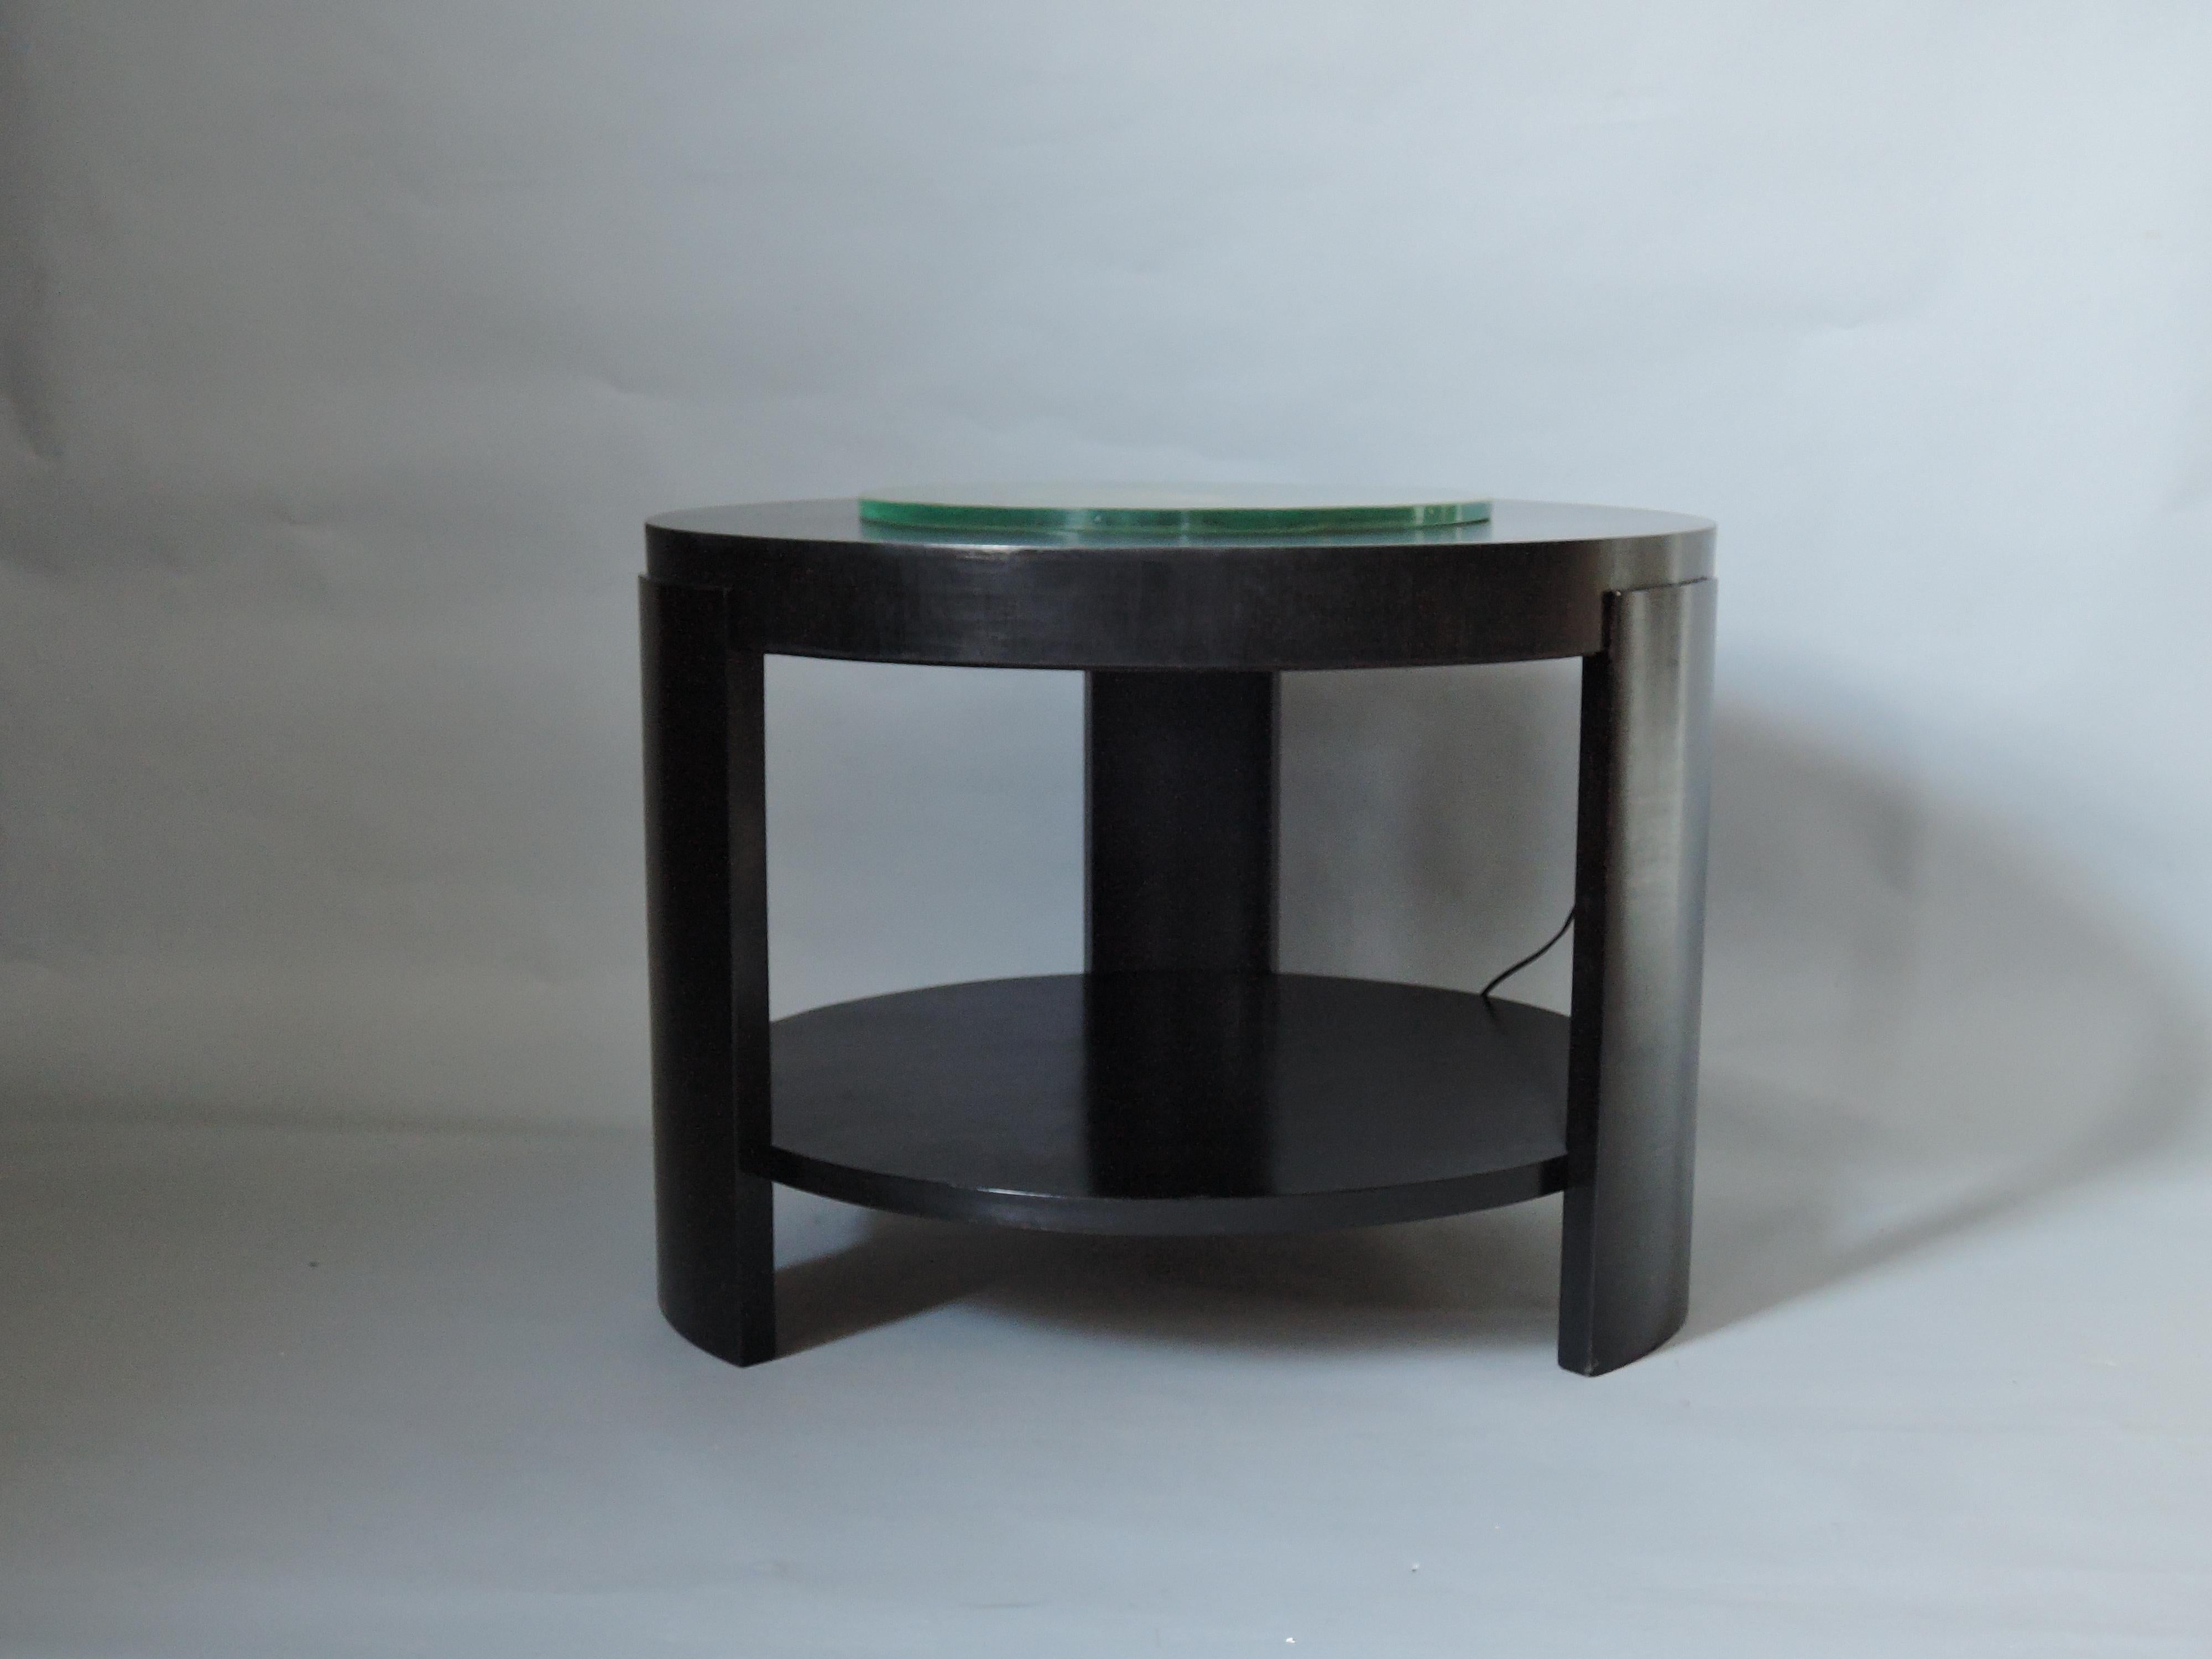 A rare Art Deco Belgium two-tier illuminating ebonized walnut gueridon/side table by De Coene with a centre glass slab.
Historic: Model presented at the 1935 Exposition Universelle in Brussels 
Bibliography: Collectif, 